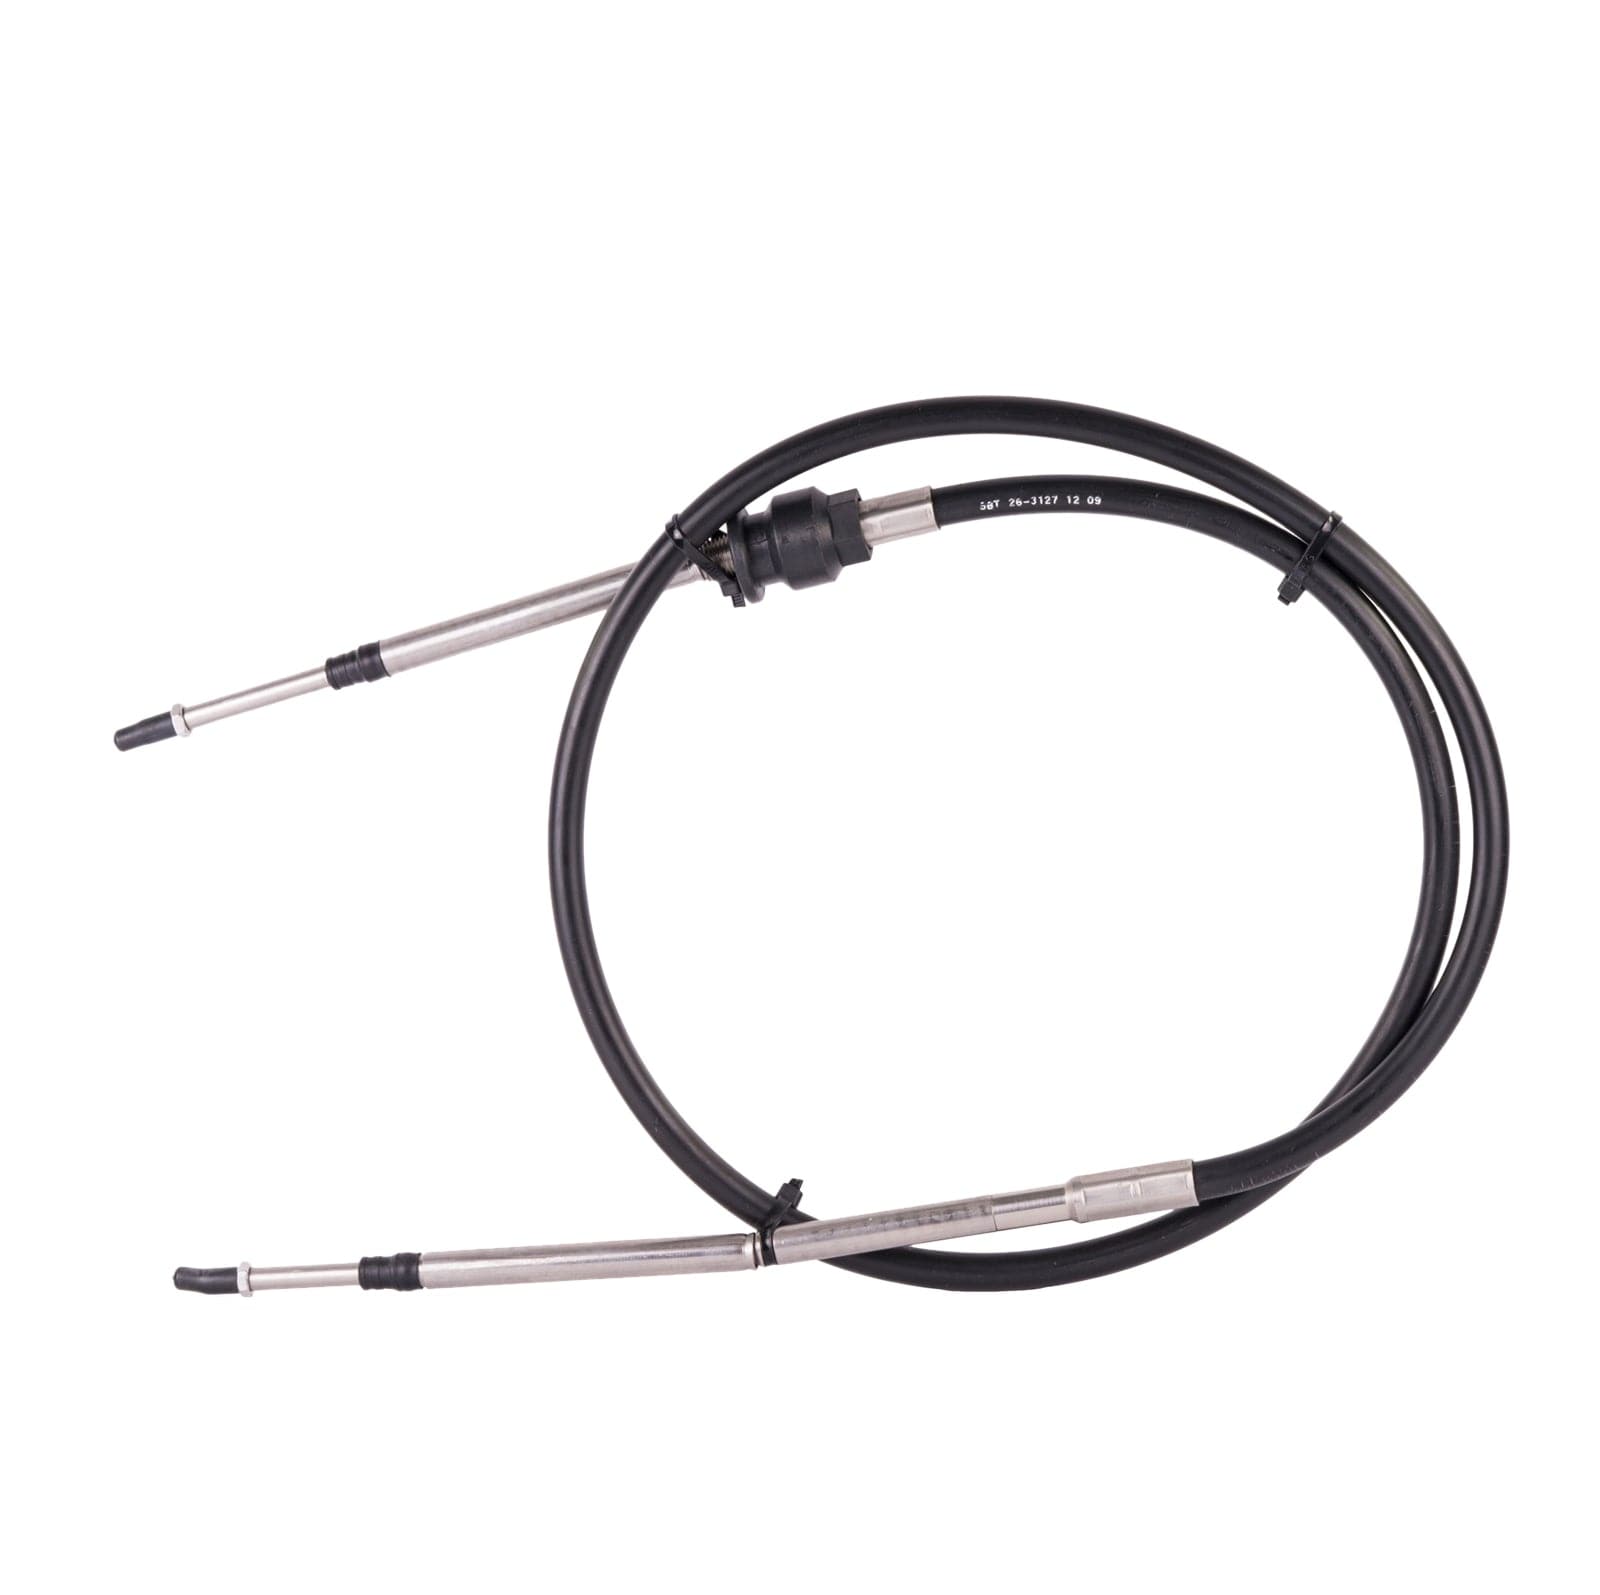 SBT Steering Cable for Sea-Doo RX X 289100070 2001